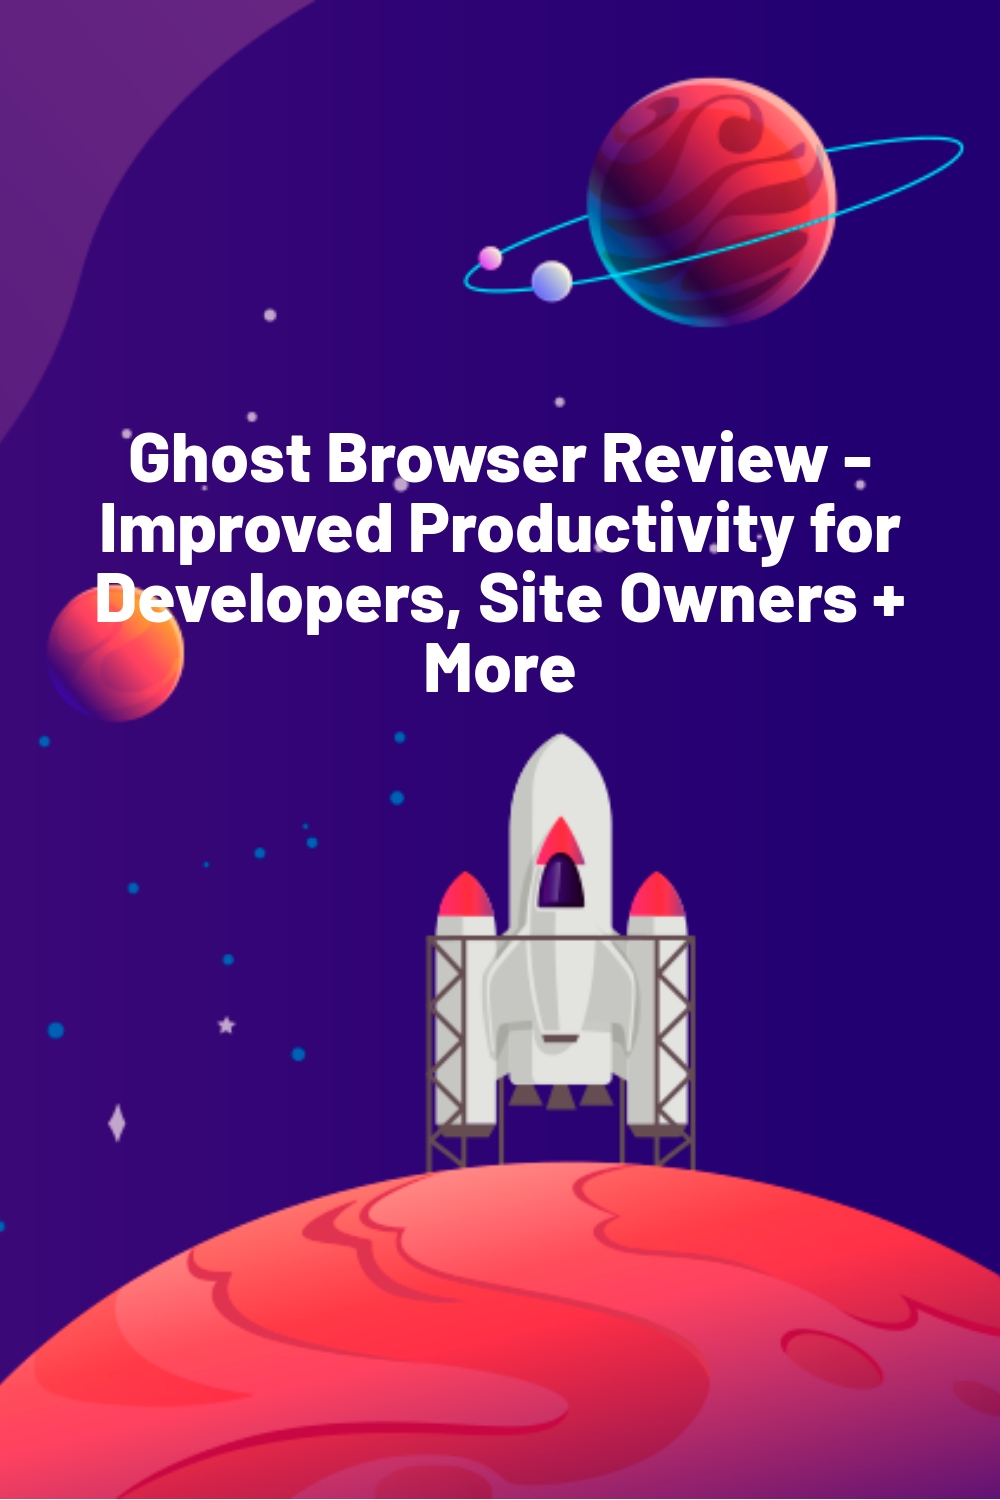 Ghost Browser Review – Improved Productivity for Developers, Site Owners + More